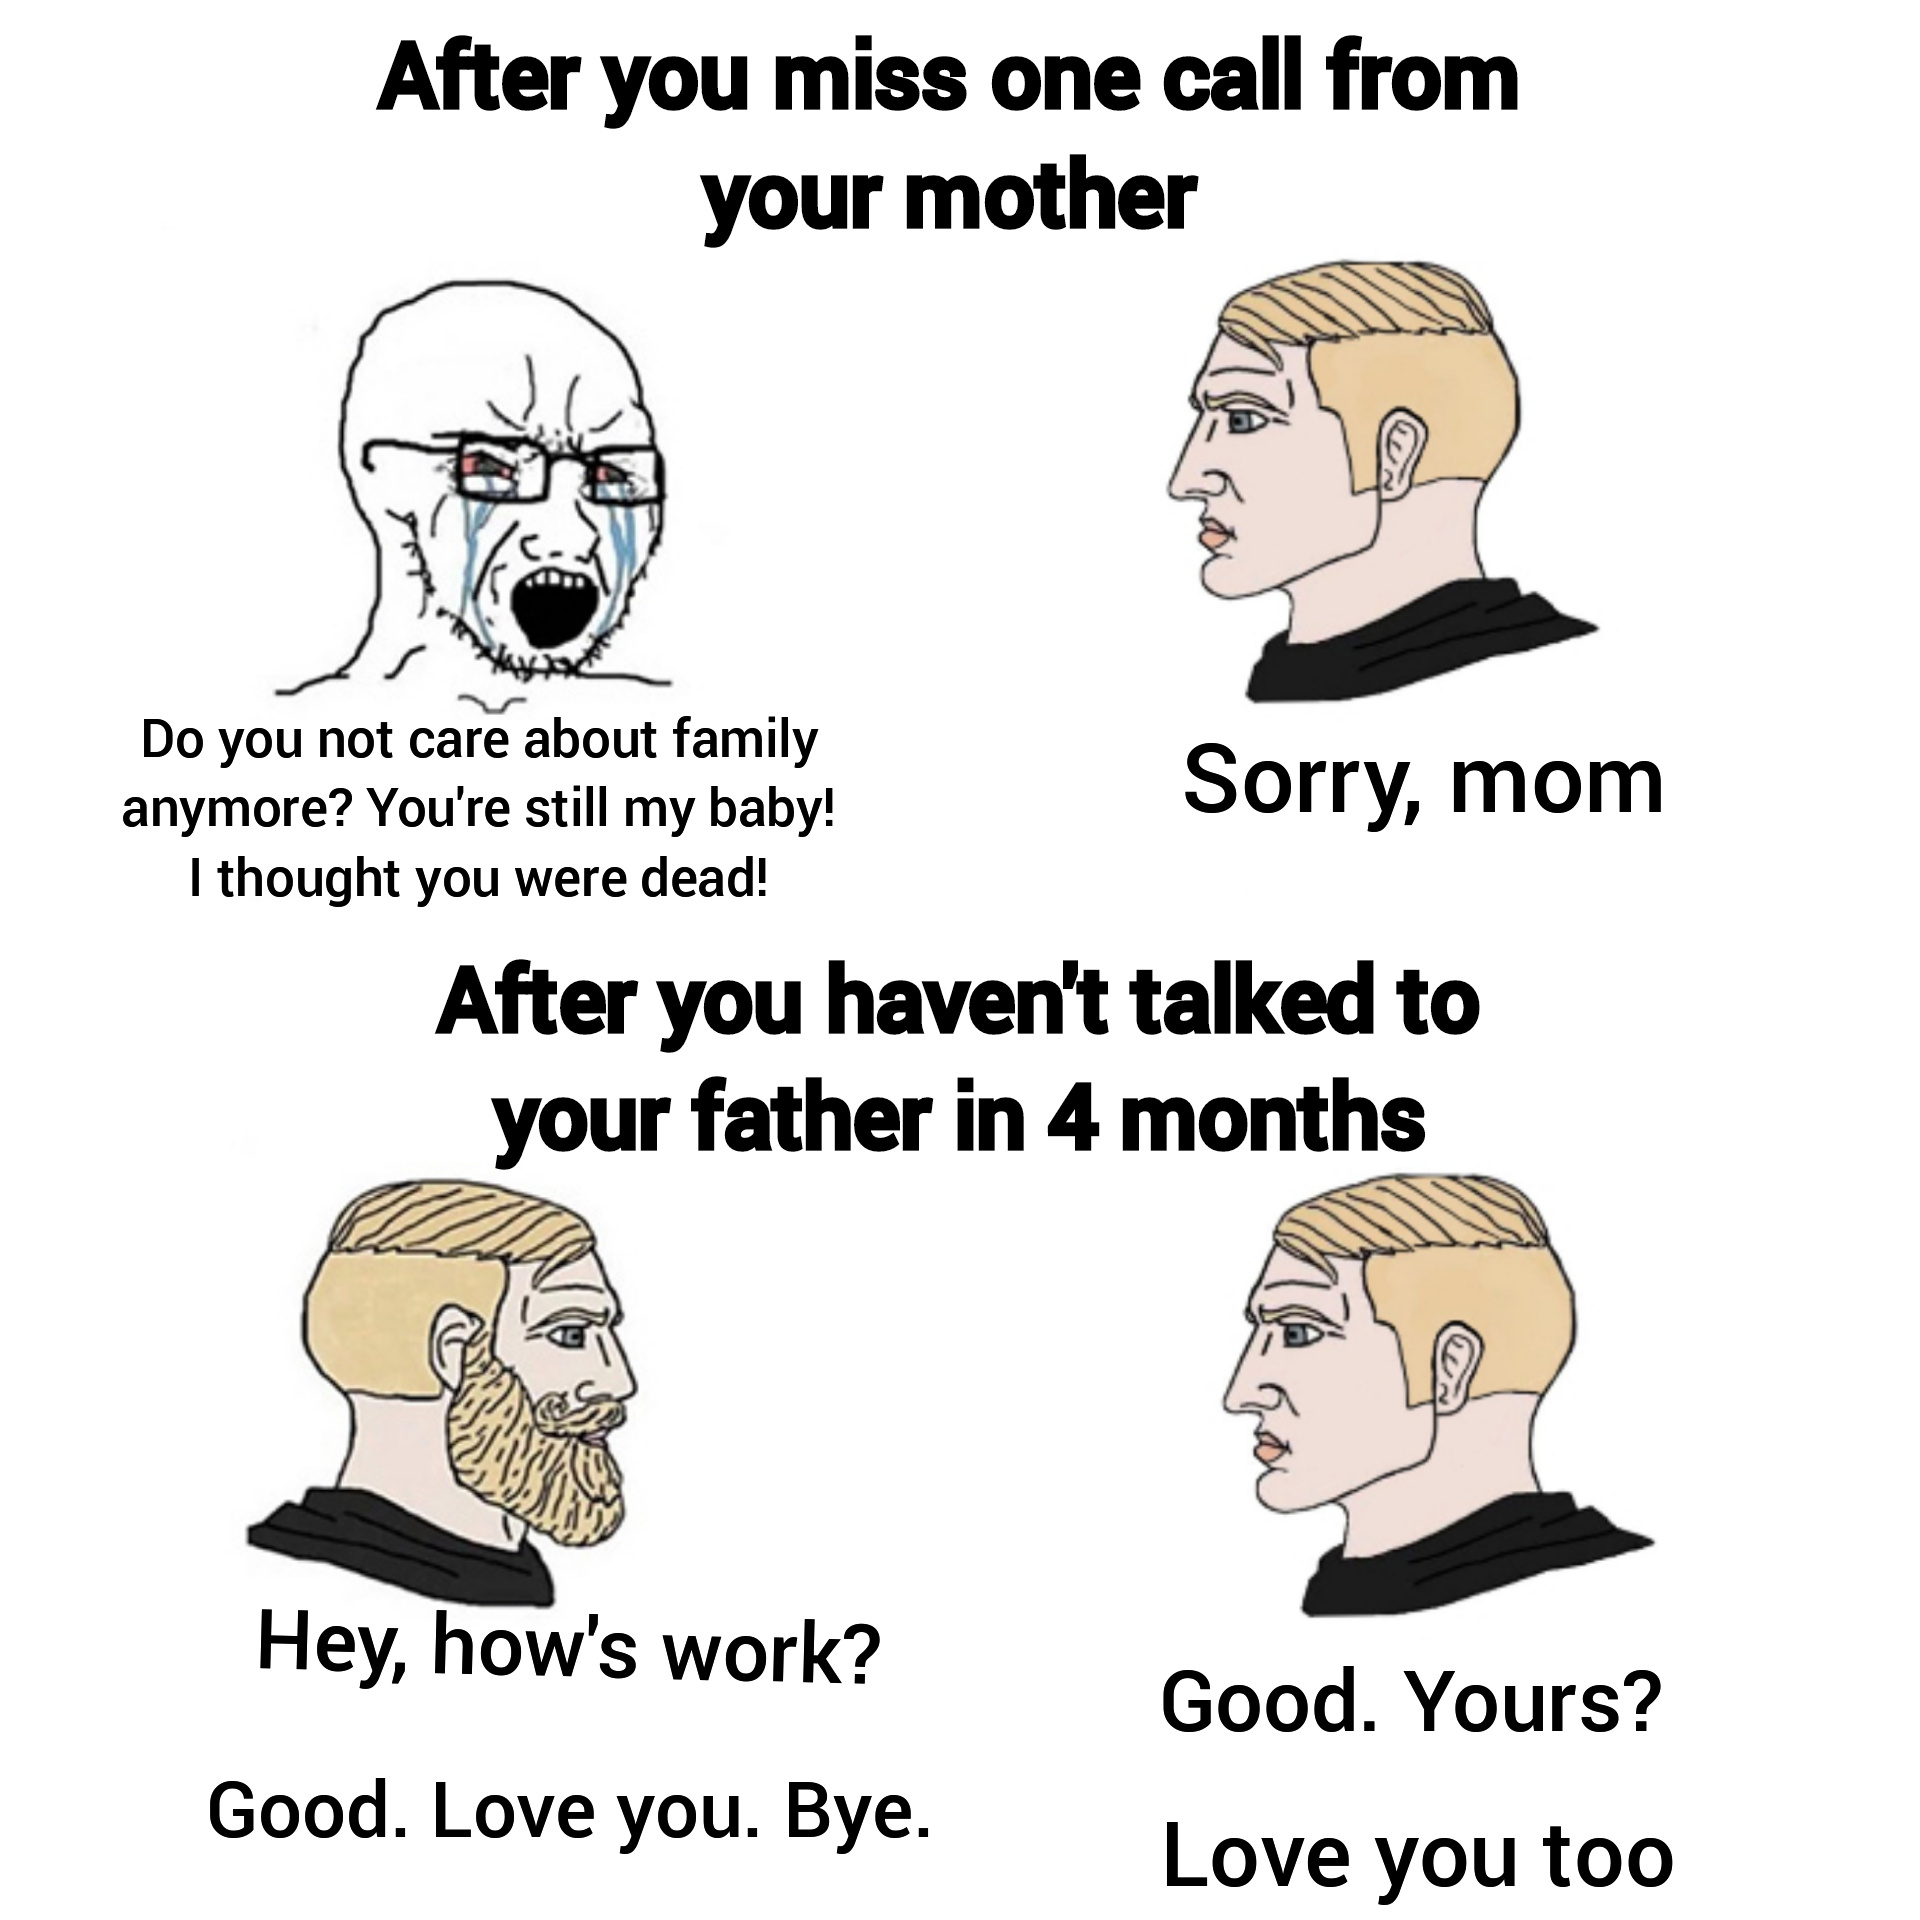 cartoon - After you miss one call from your mother Do you not care about family anymore? You're still my baby! Sorry, mom I thought you were dead! After you haven't talked to your father in 4 months Hey, how's work? Good. Yours? Good. Love you. Bye. Love 